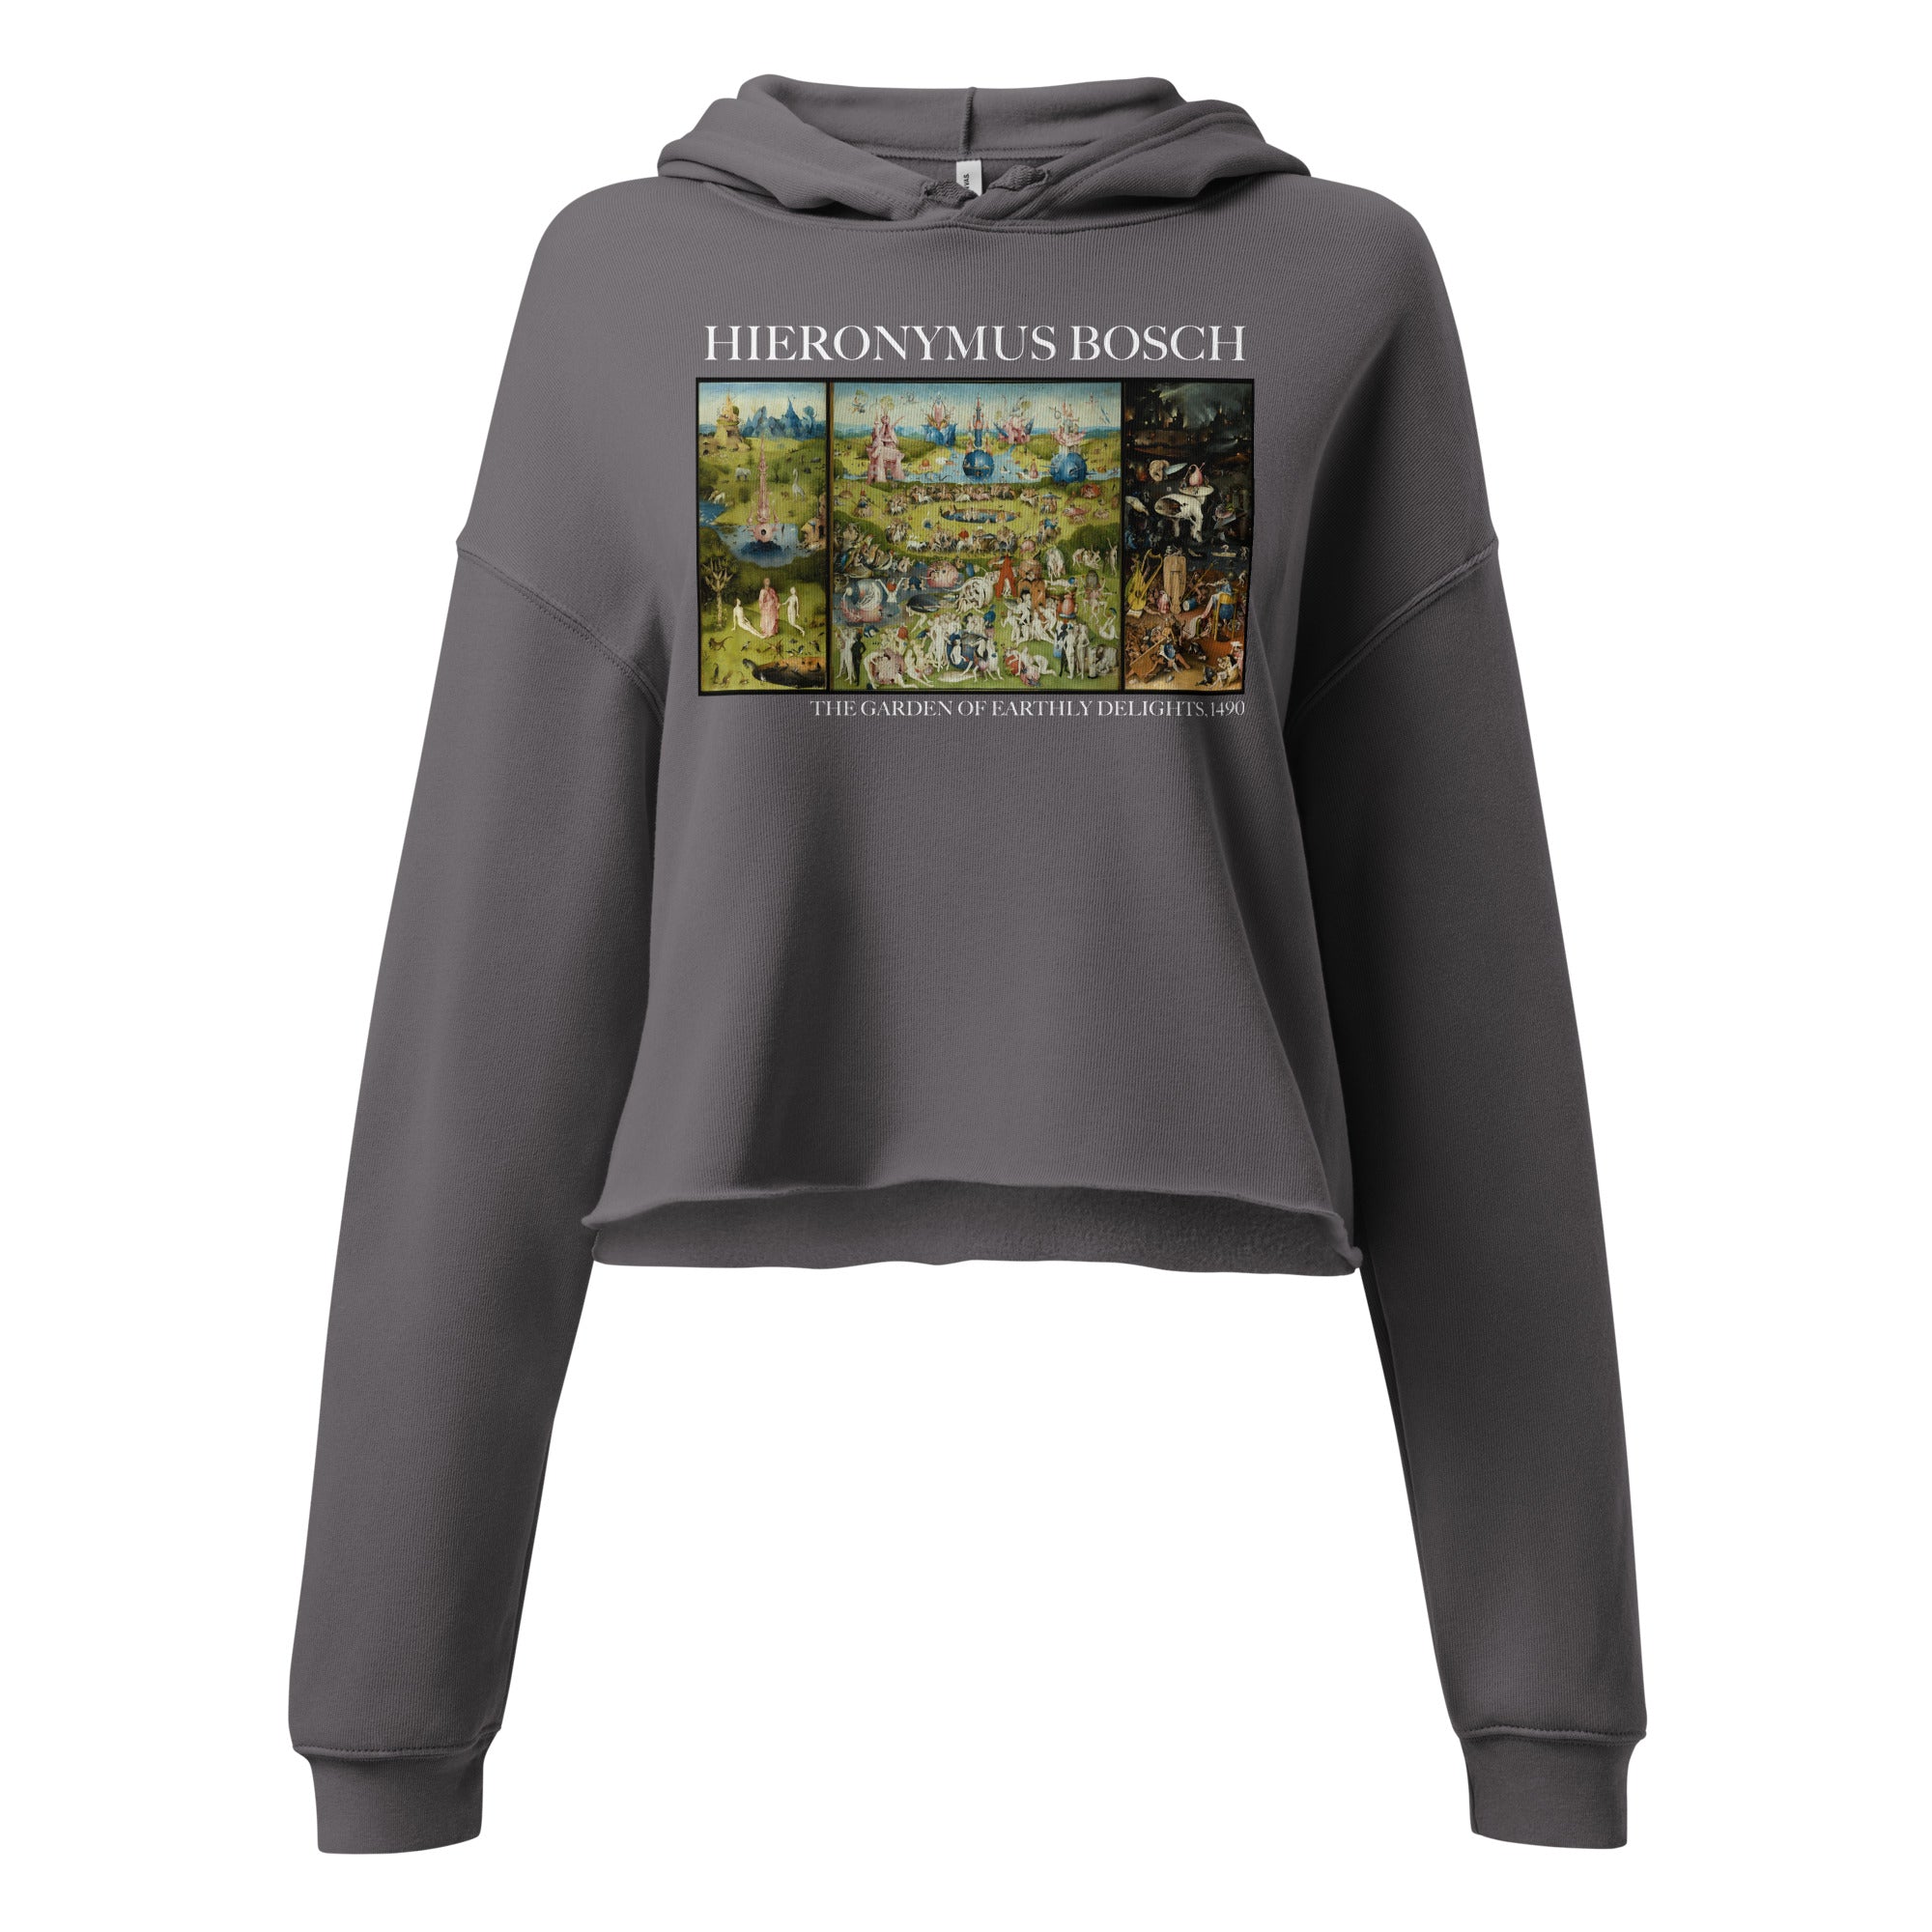 Hieronymus Bosch 'The Garden of Earthly Delights' Famous Painting Cropped Hoodie | Premium Art Cropped Hoodie